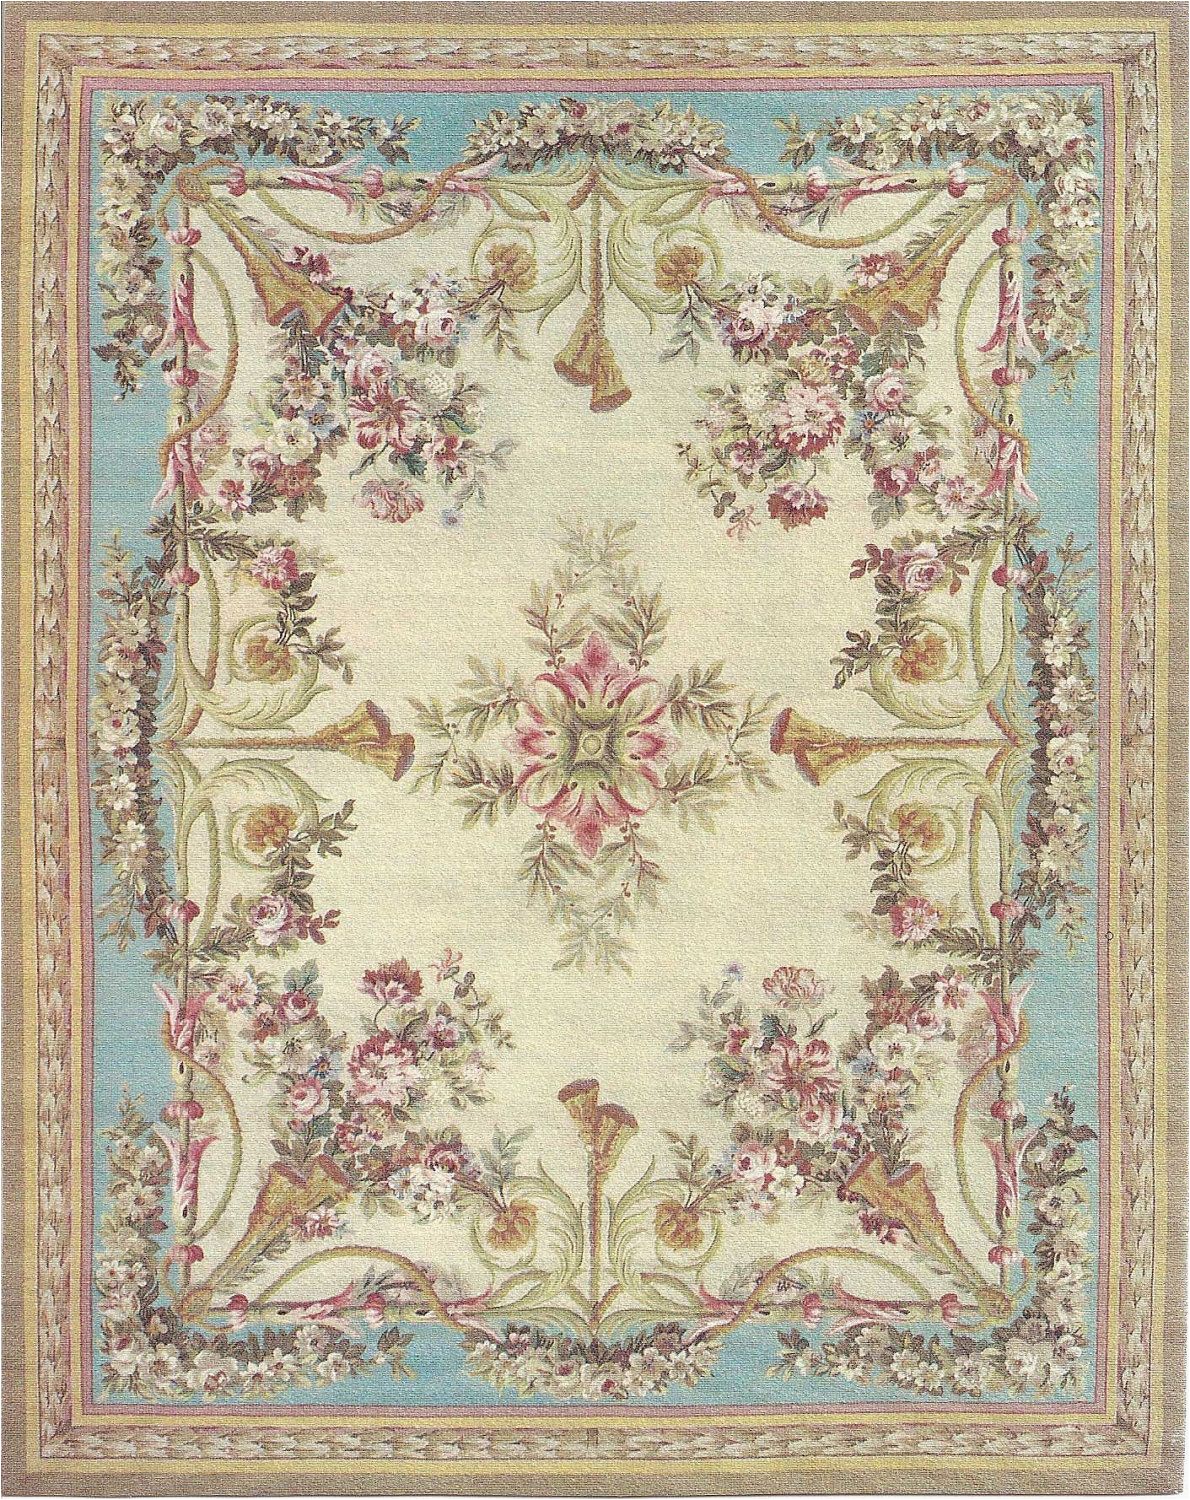 Shabby Chic Style area Rugs Shabby Chic area Rugs Rugs Planet